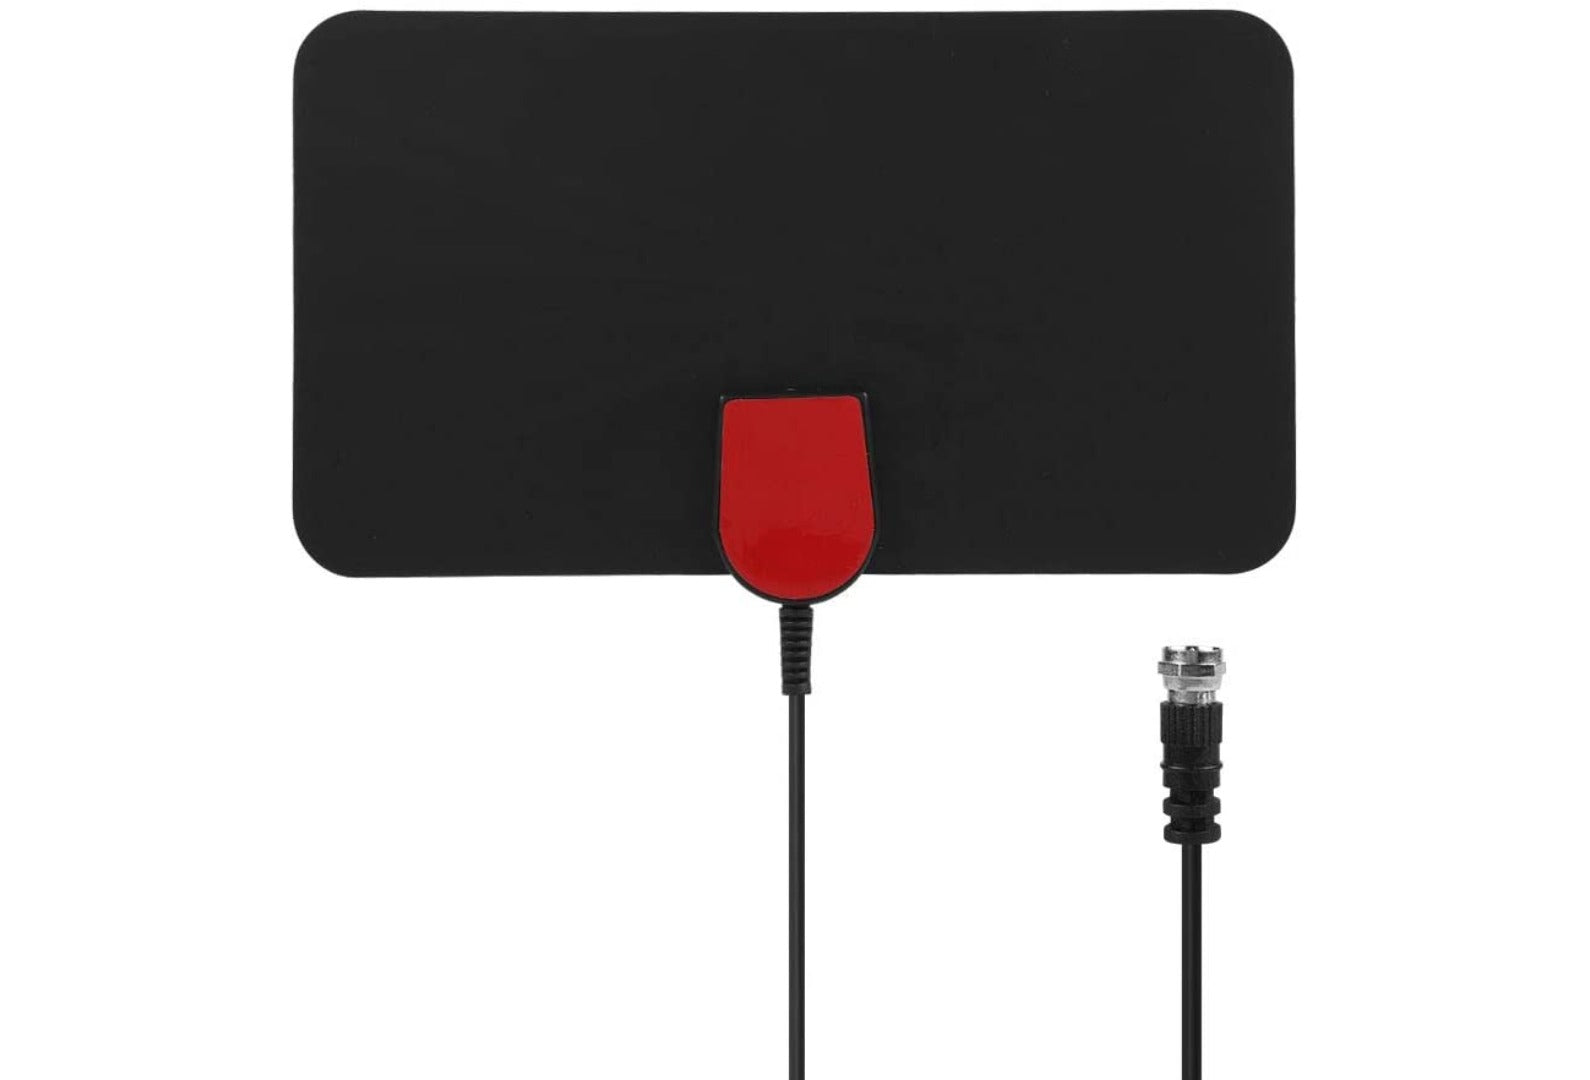 FREE - Digital TV Antenna with Adhesive Patches Support Full HD 720P, 1080P, 1080I, and 4K HD Digital TV.